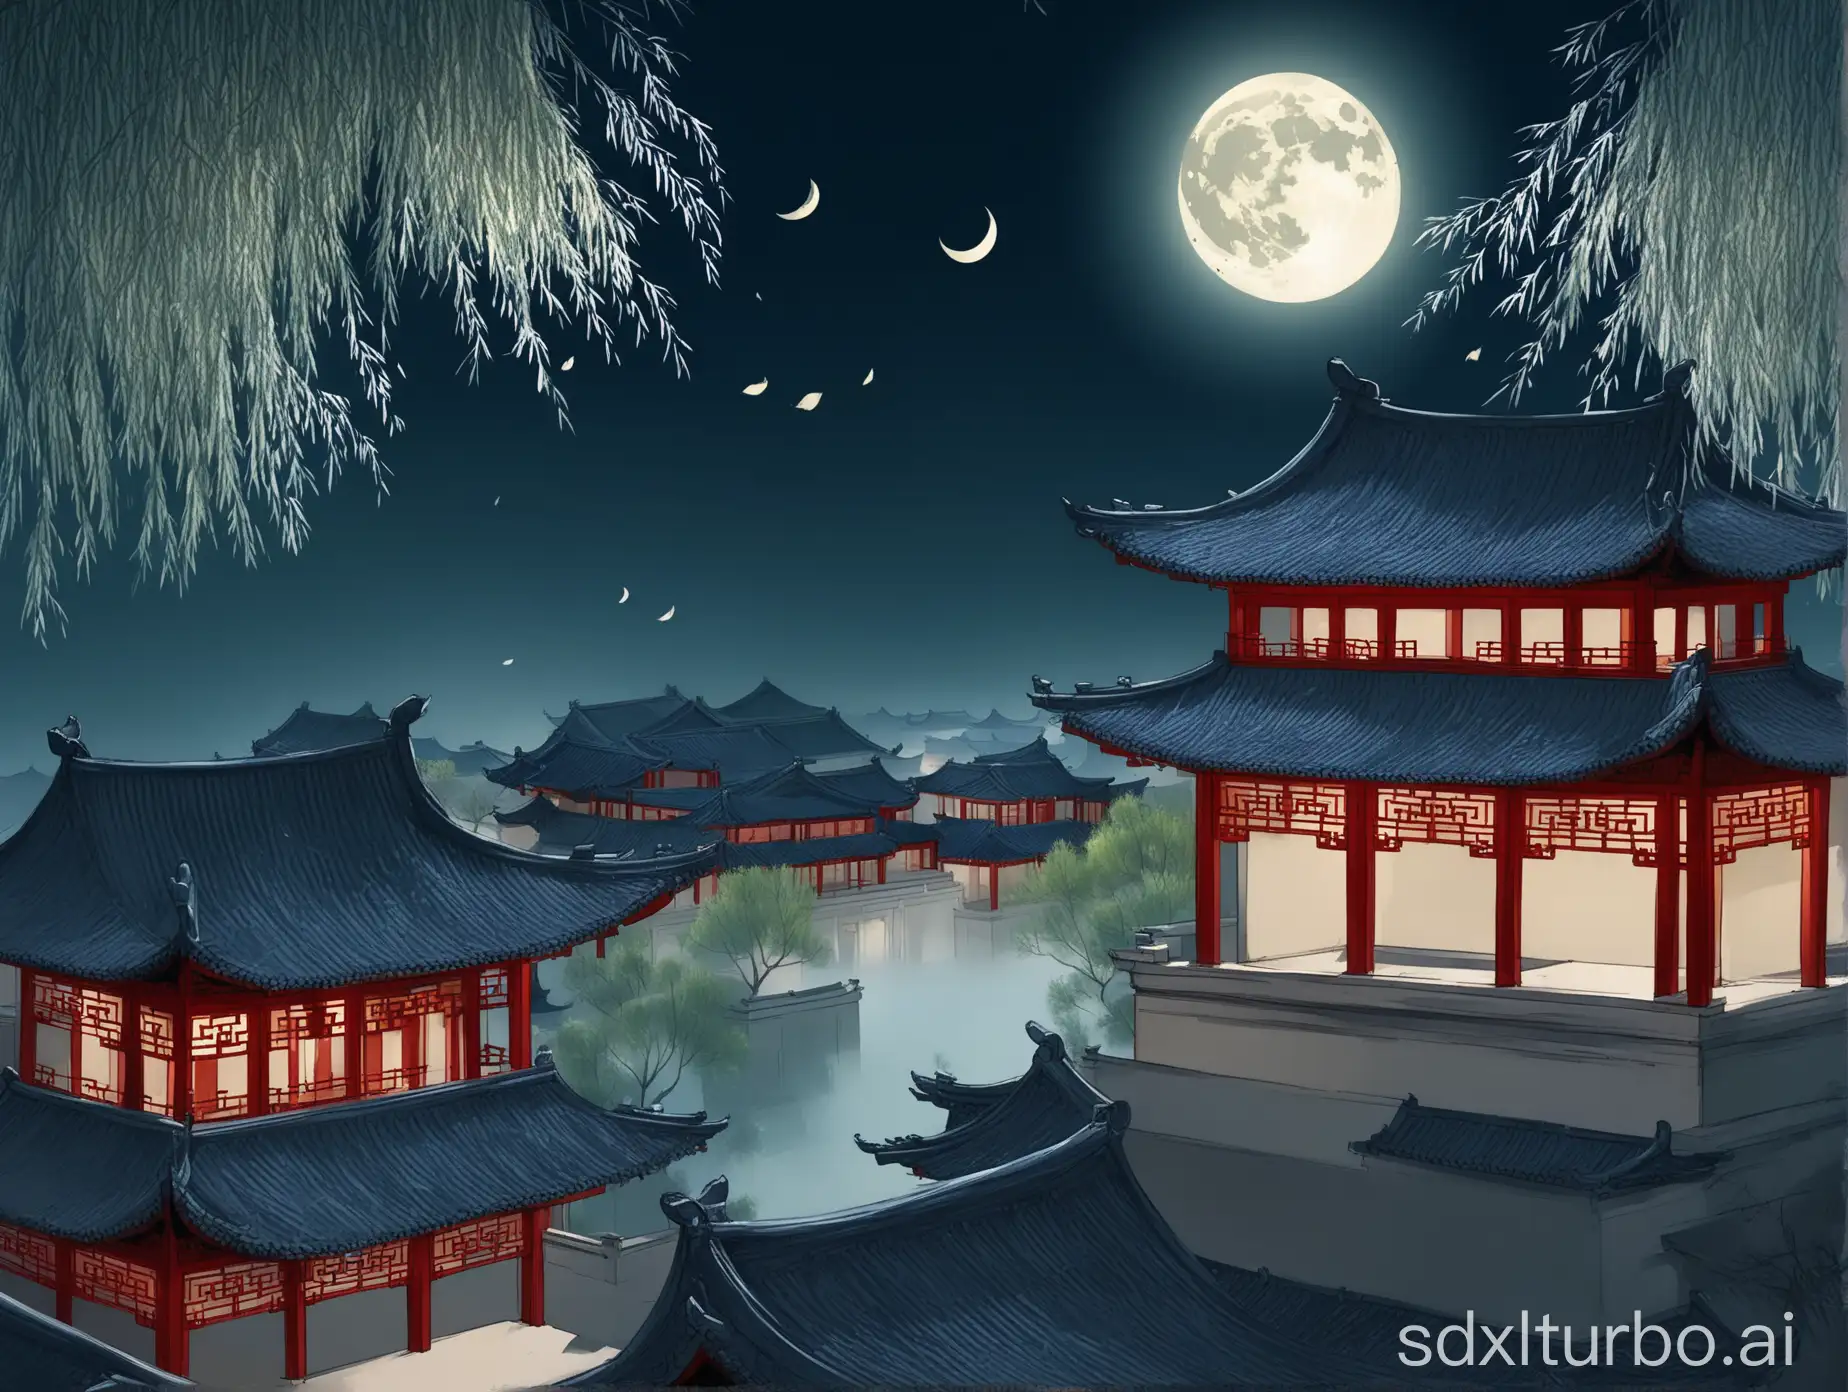 grand and round and bright moonlight, on top of classical Chinese architecture roofs, willow trees' leaves swaying in the wind